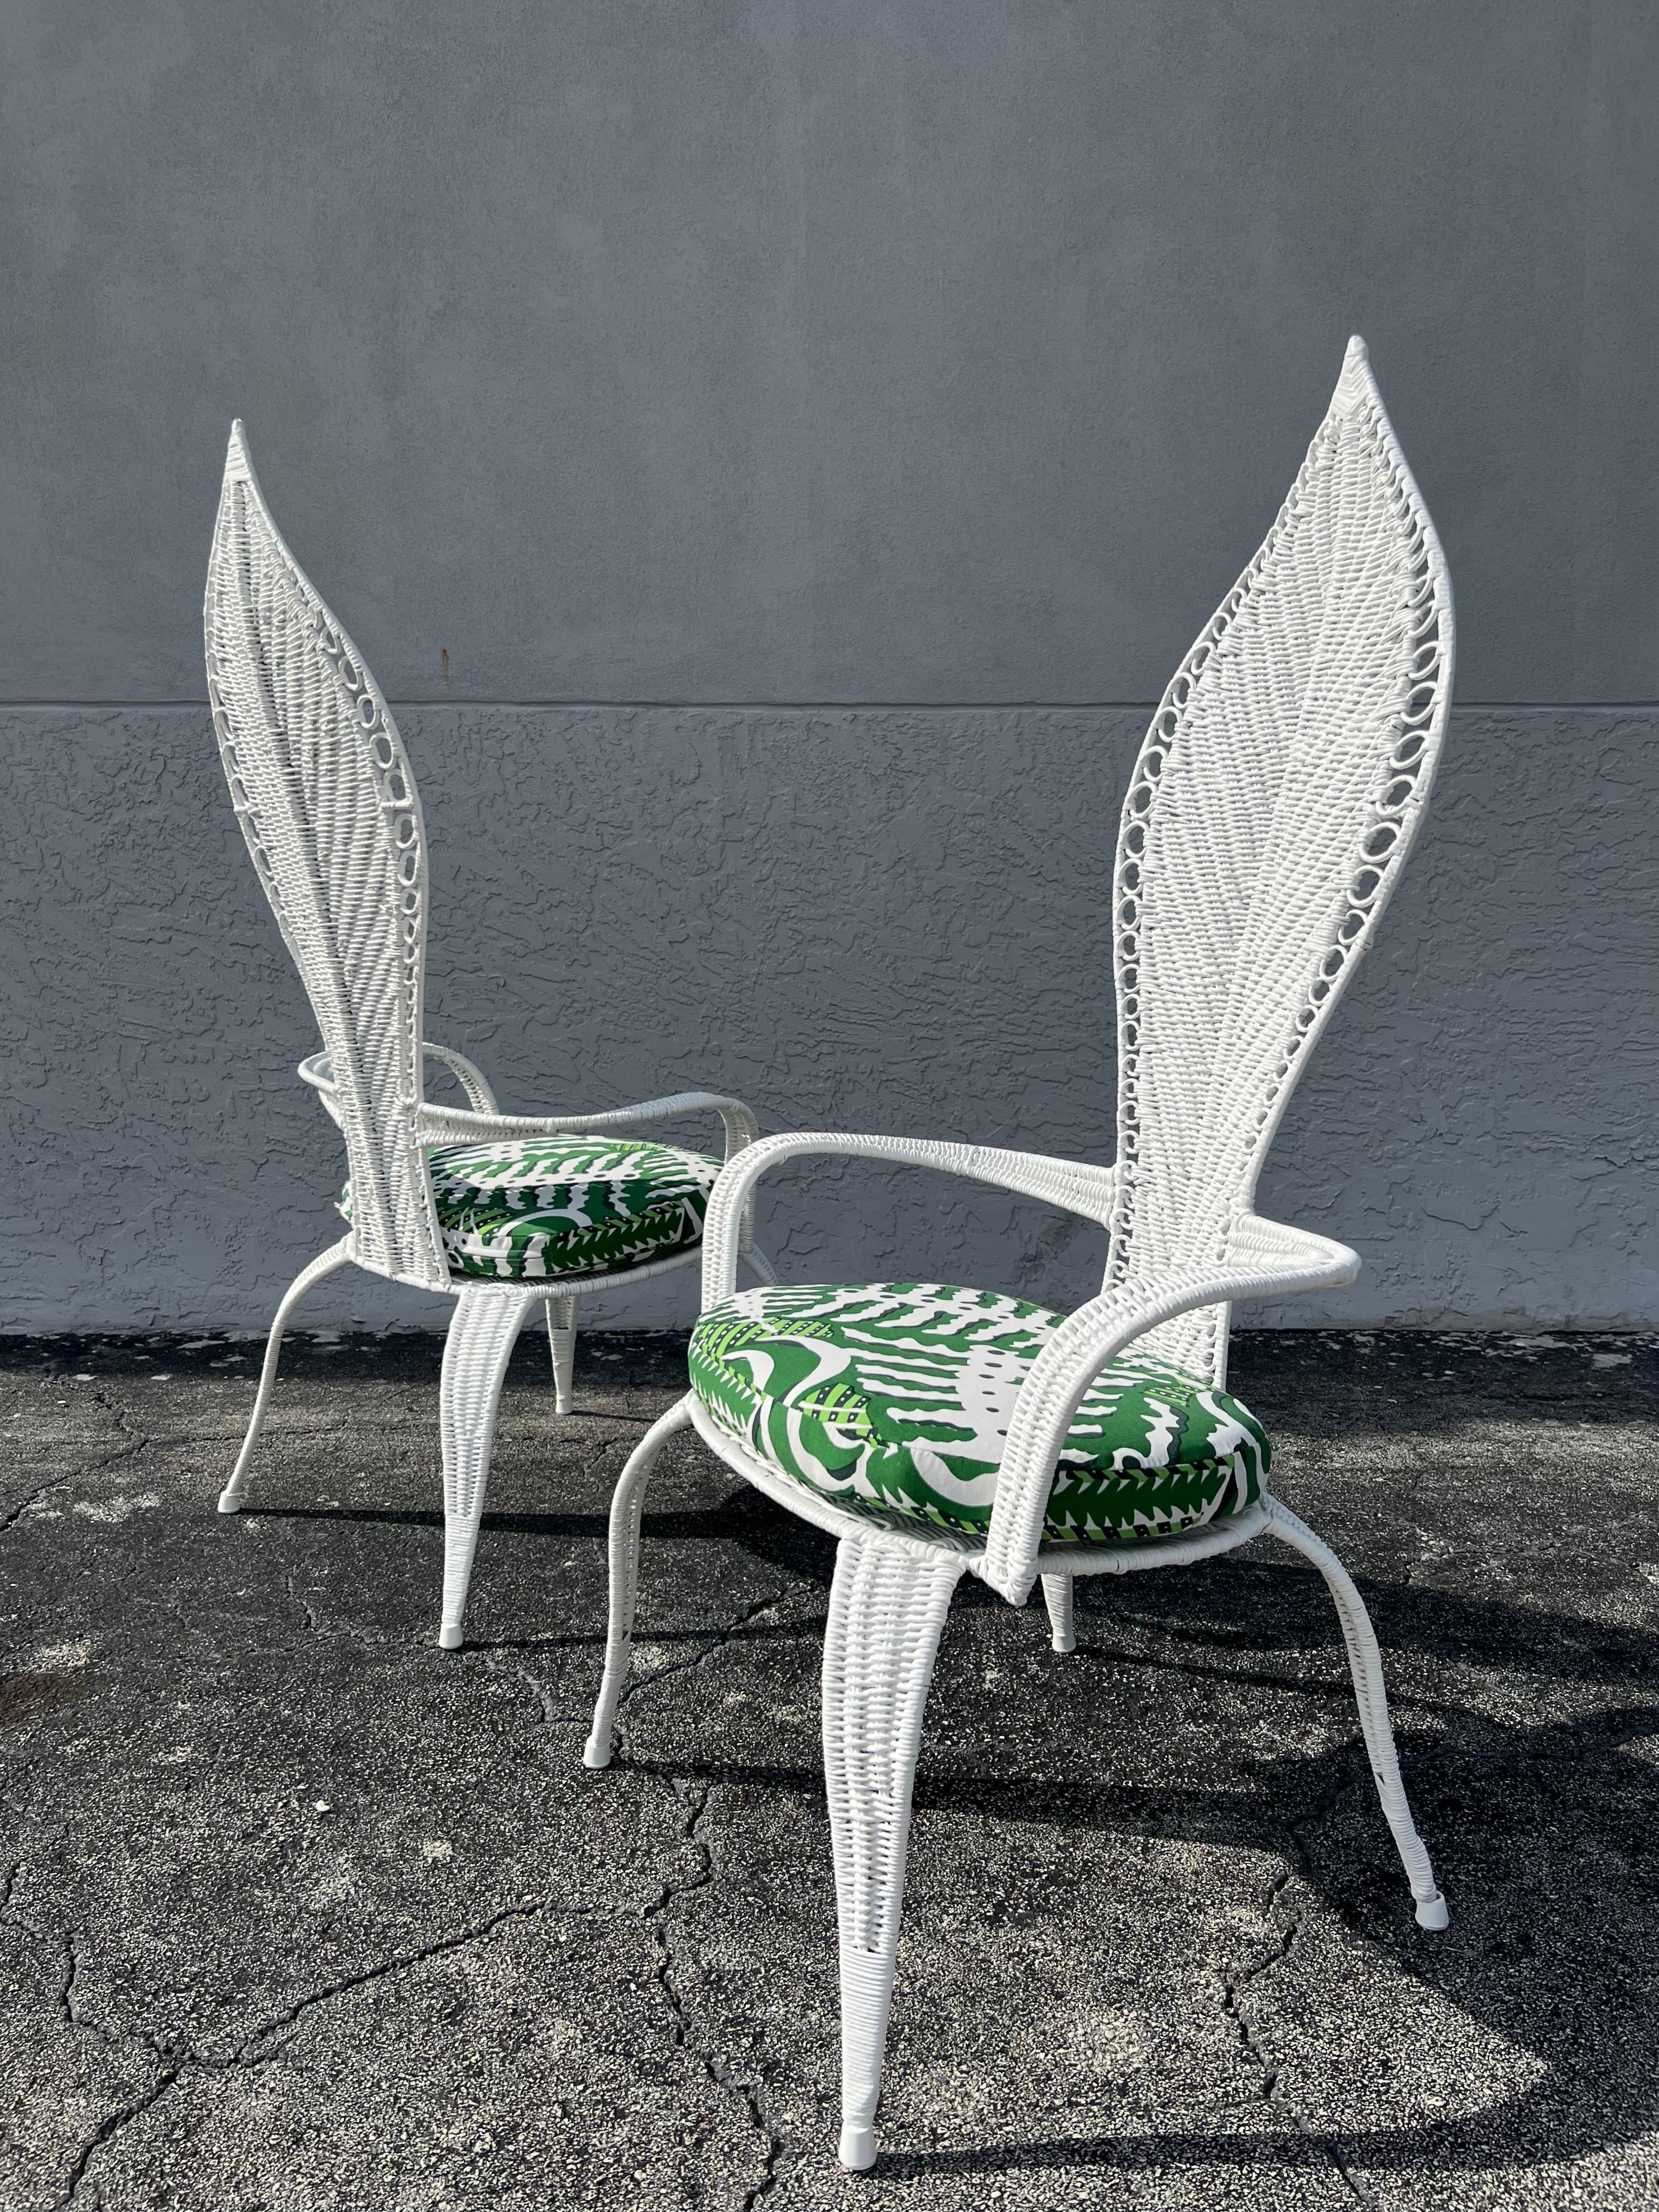 Pair of Danny Ho Fong For Tropi-Cal attributed woven high back chairs. Imperfections under newly lacquered finish, newly upholstered (please refer to photos). Additional photos available upon request. 

Would work well in a variety of interiors